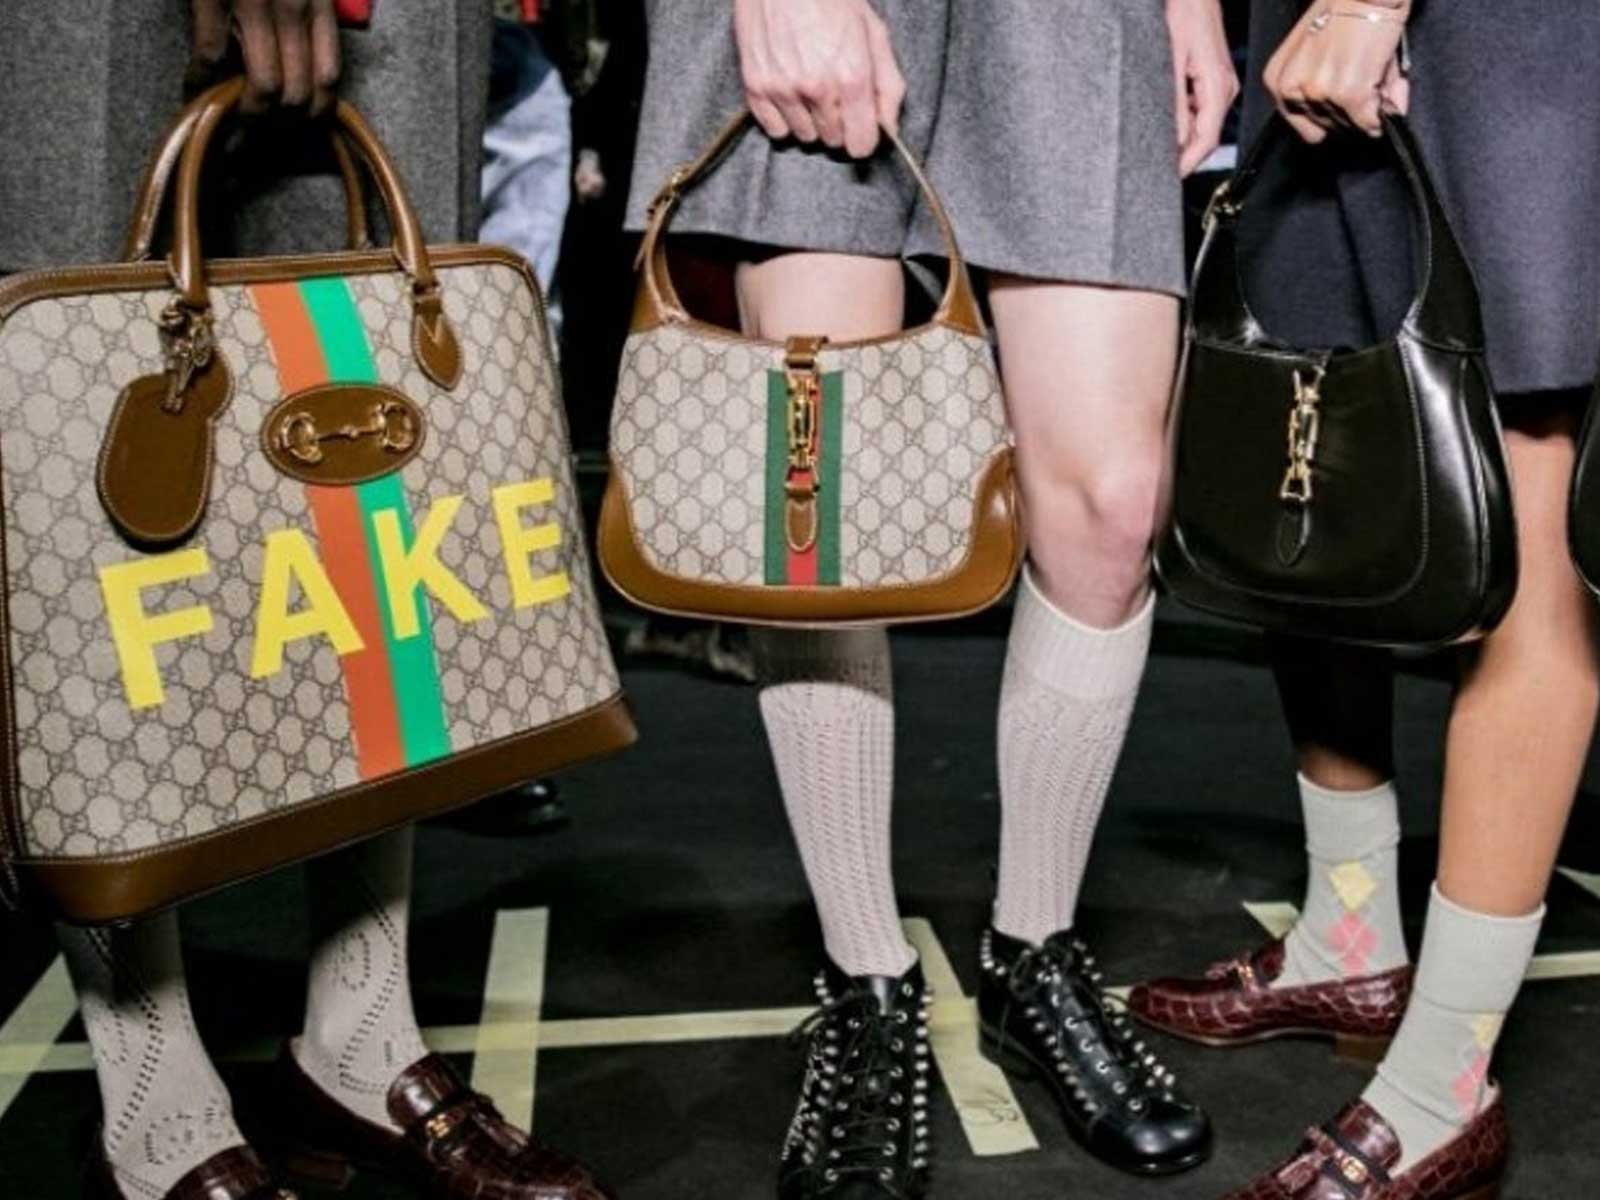 Generation Z’s obsession with counterfeit fashion